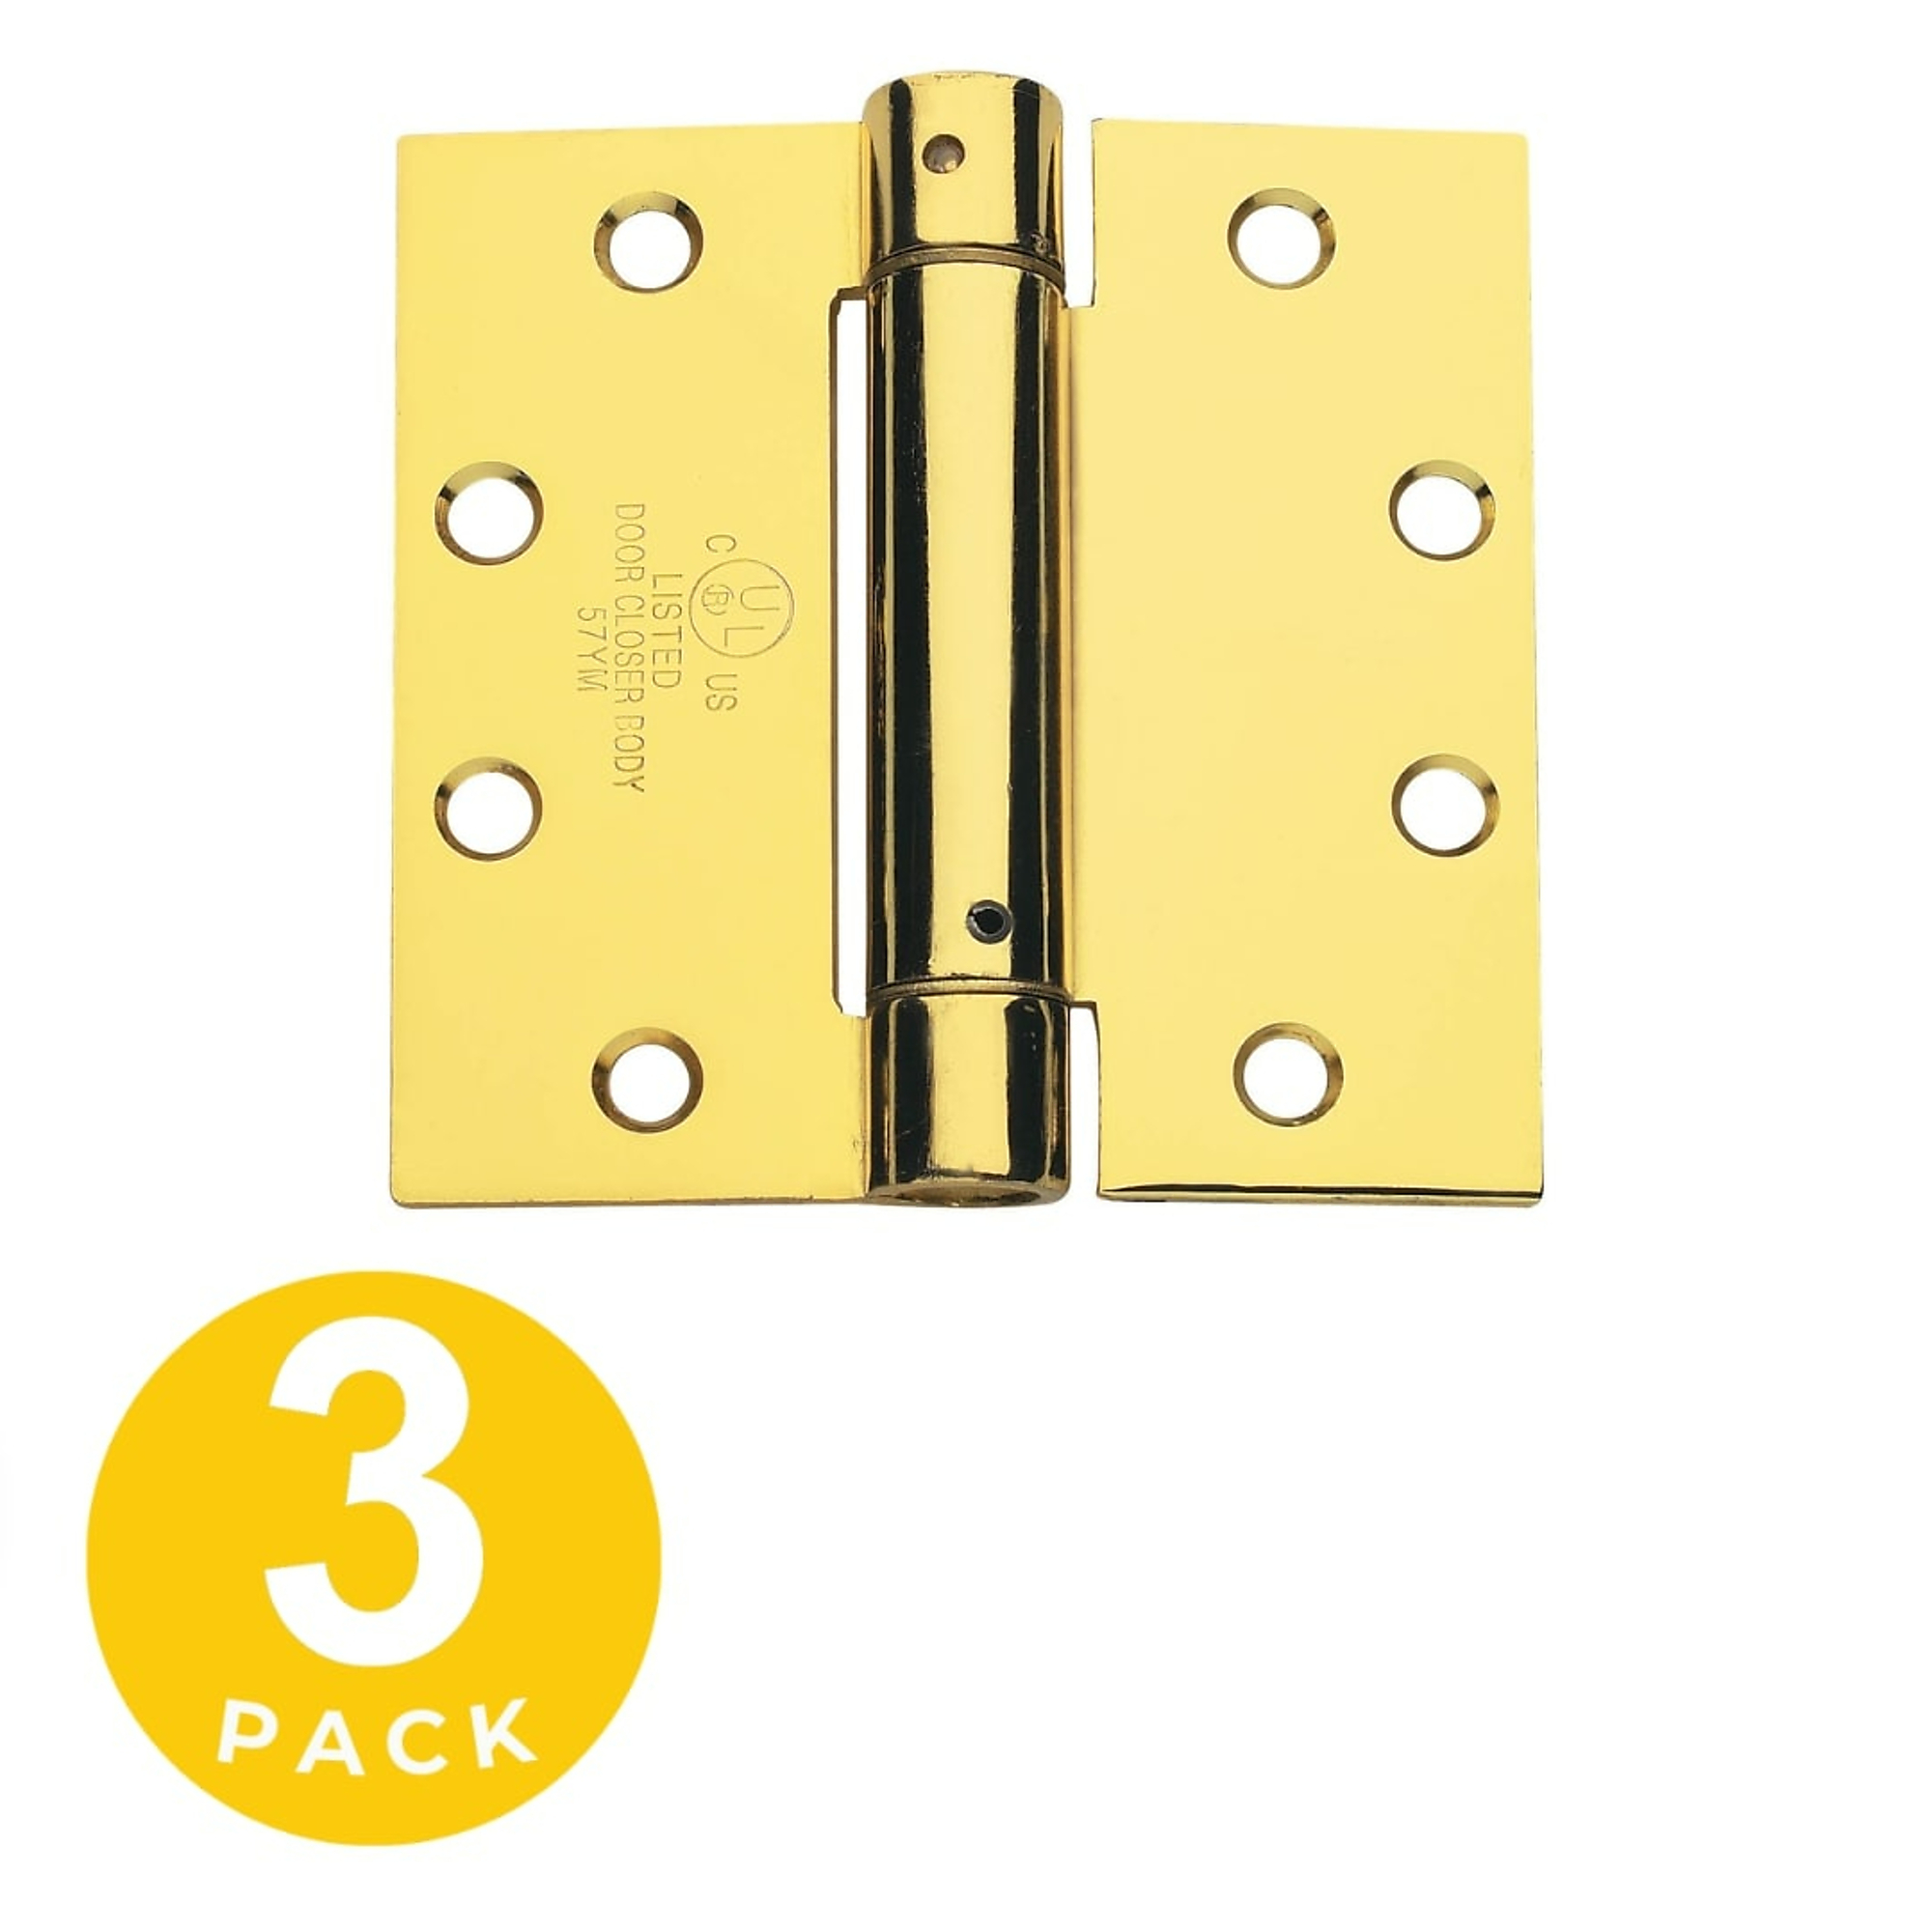 Global Door Controls, Full Mortise Spring Fixed Pin Squared Hinge - Set of 3 Model CPS4545-US3-3